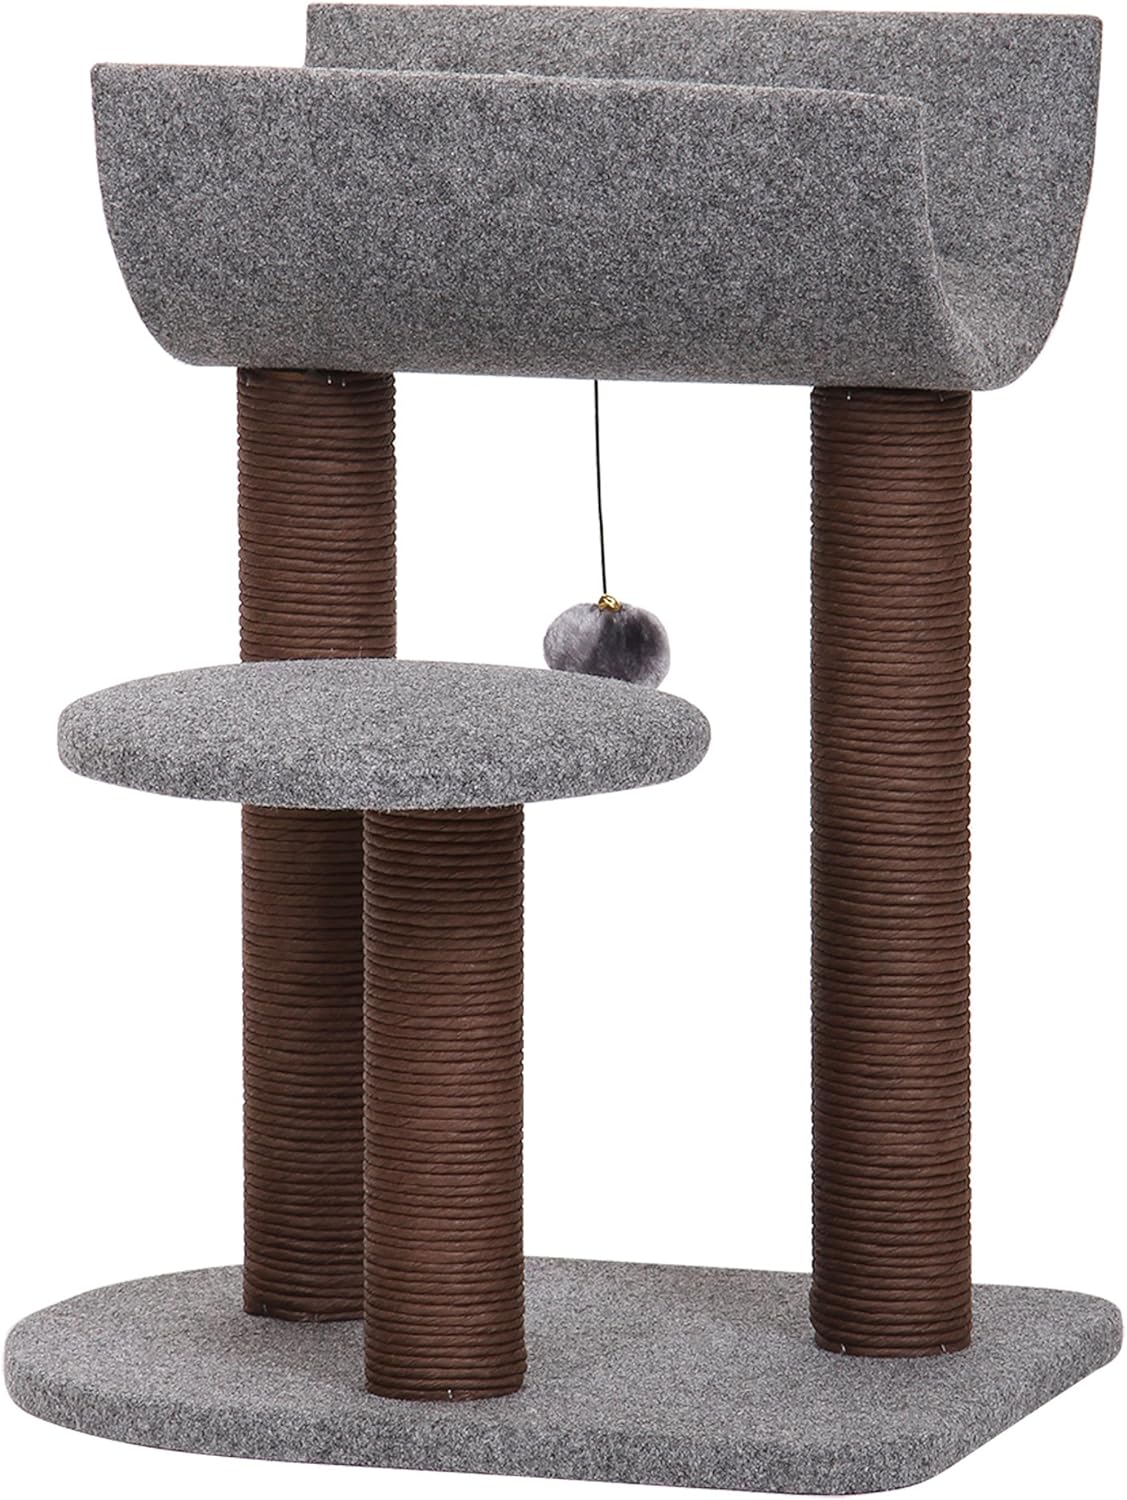 PetPals Cat Tree Cat Tower With Scratching Posts and Toy Ball